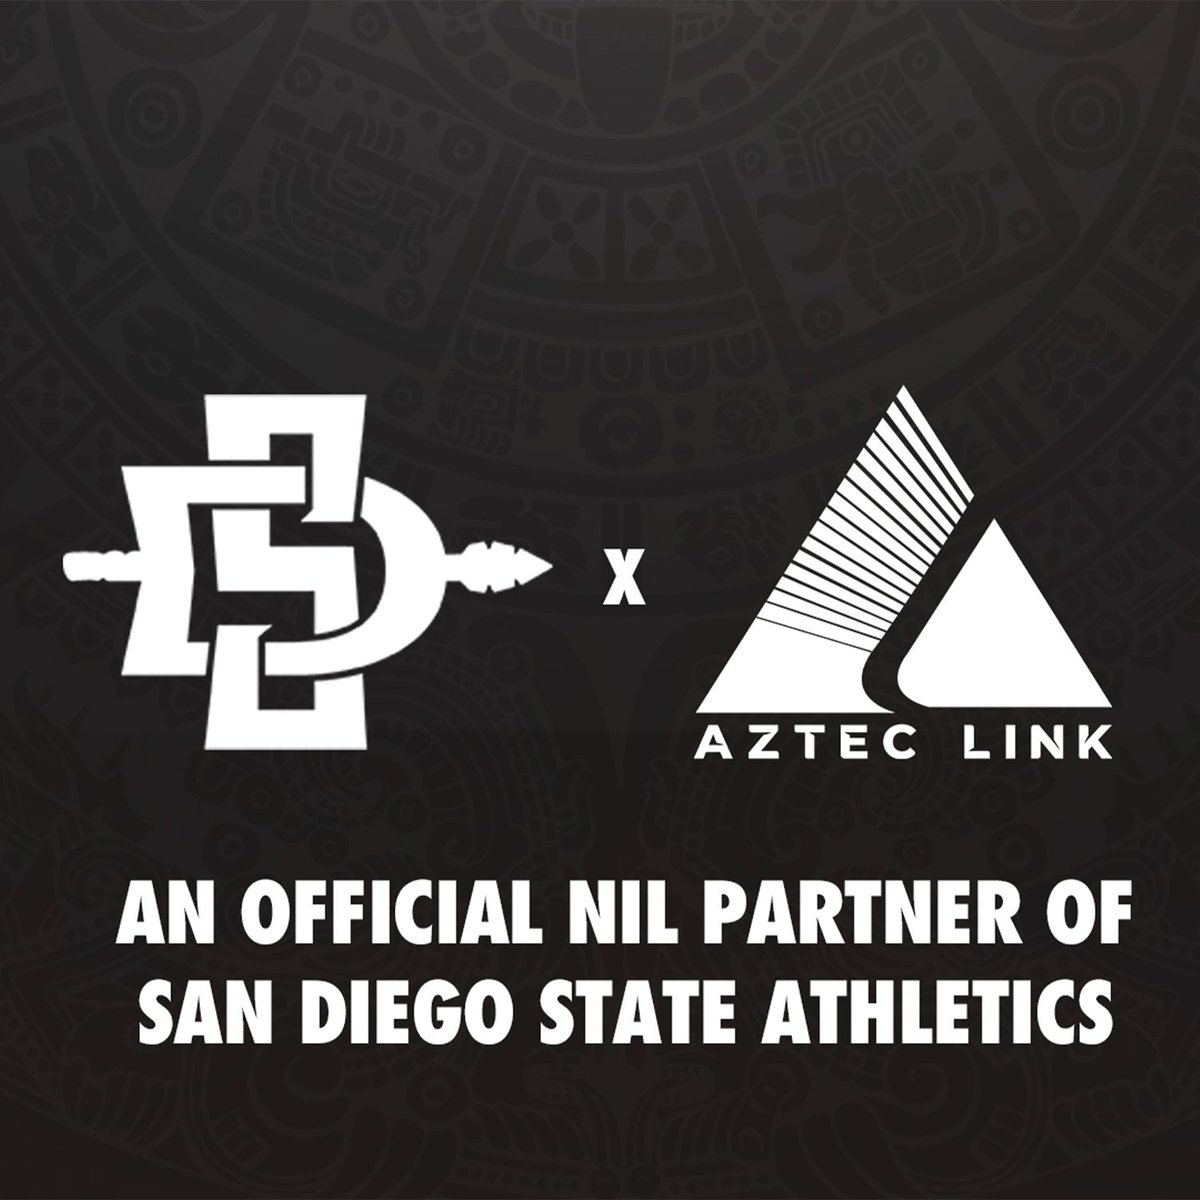 We are proud to announce @AztecLink_NIL as an official NIL partnership with @SDSU Athletics! 📰: bit.ly/48FxN8O